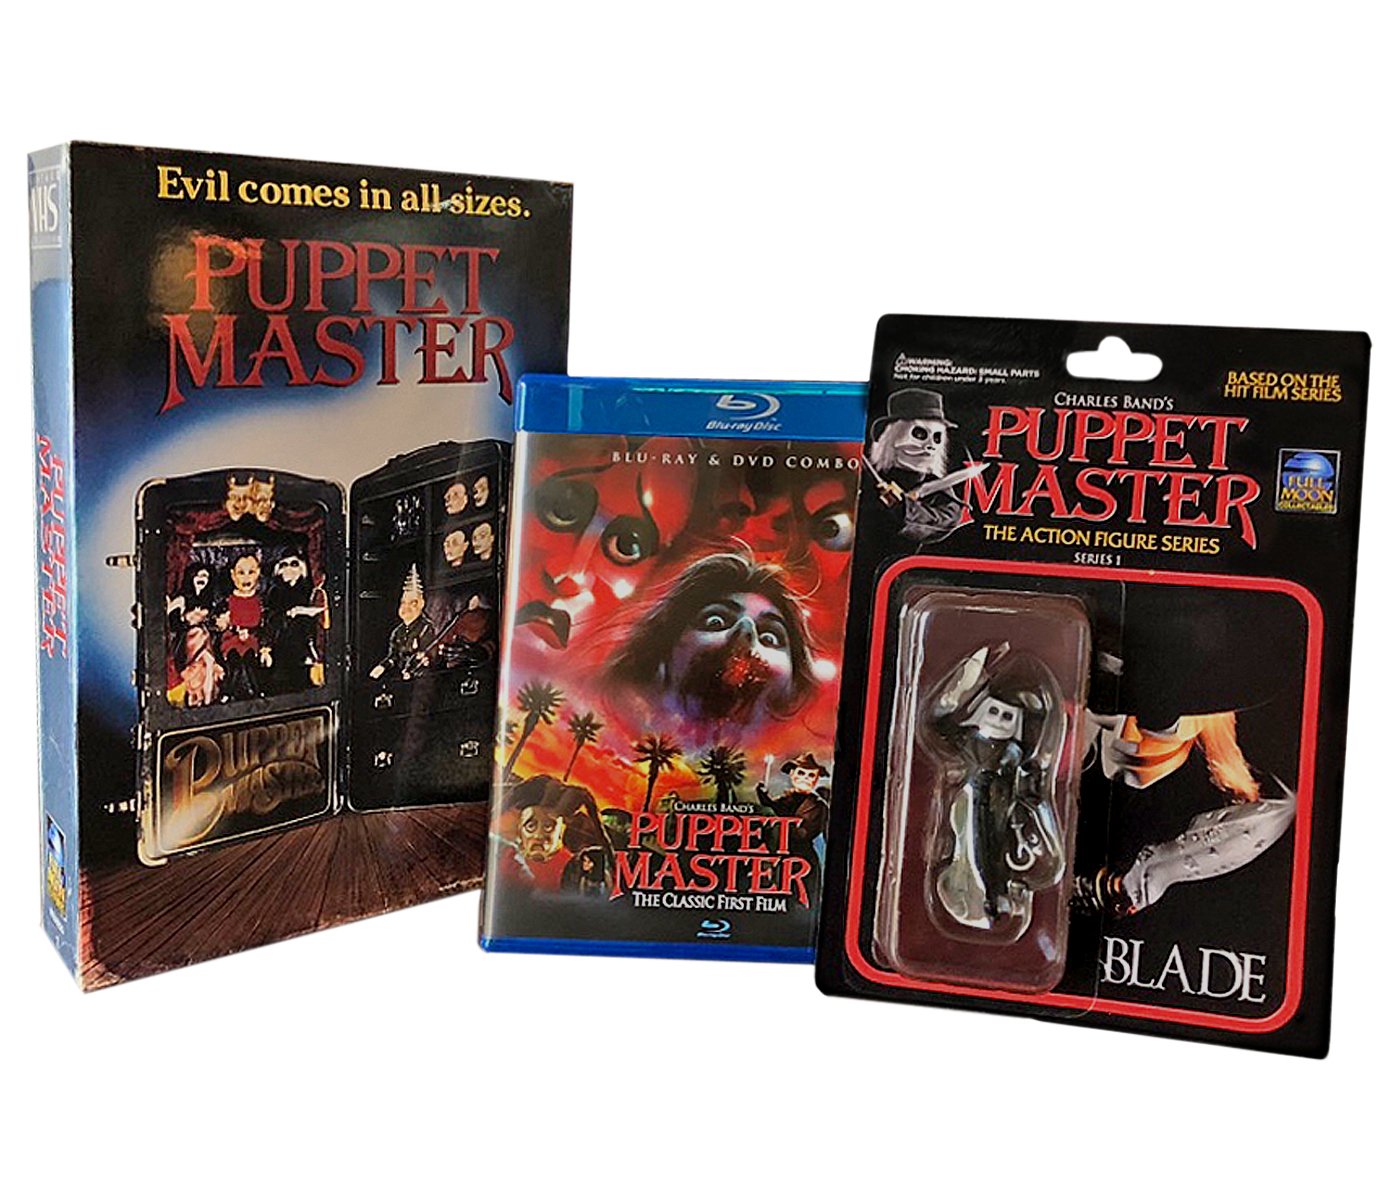 PUPPET MASTER (LIMITED EDITION) VHS BOX BLU-RAY/ACTION FIGURE [SCRATCH AND DENT]